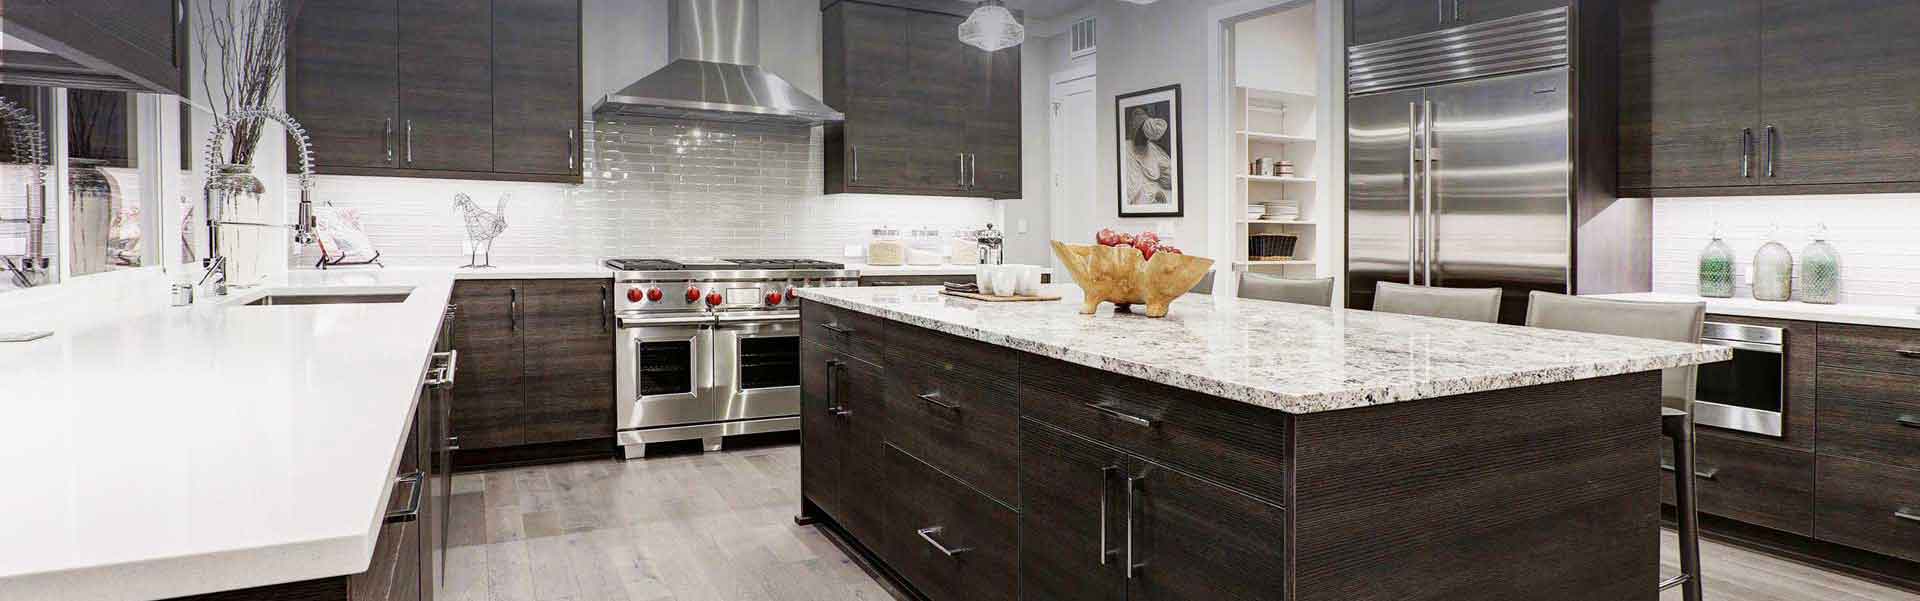 Luxury & Excellence with Granite Countertops